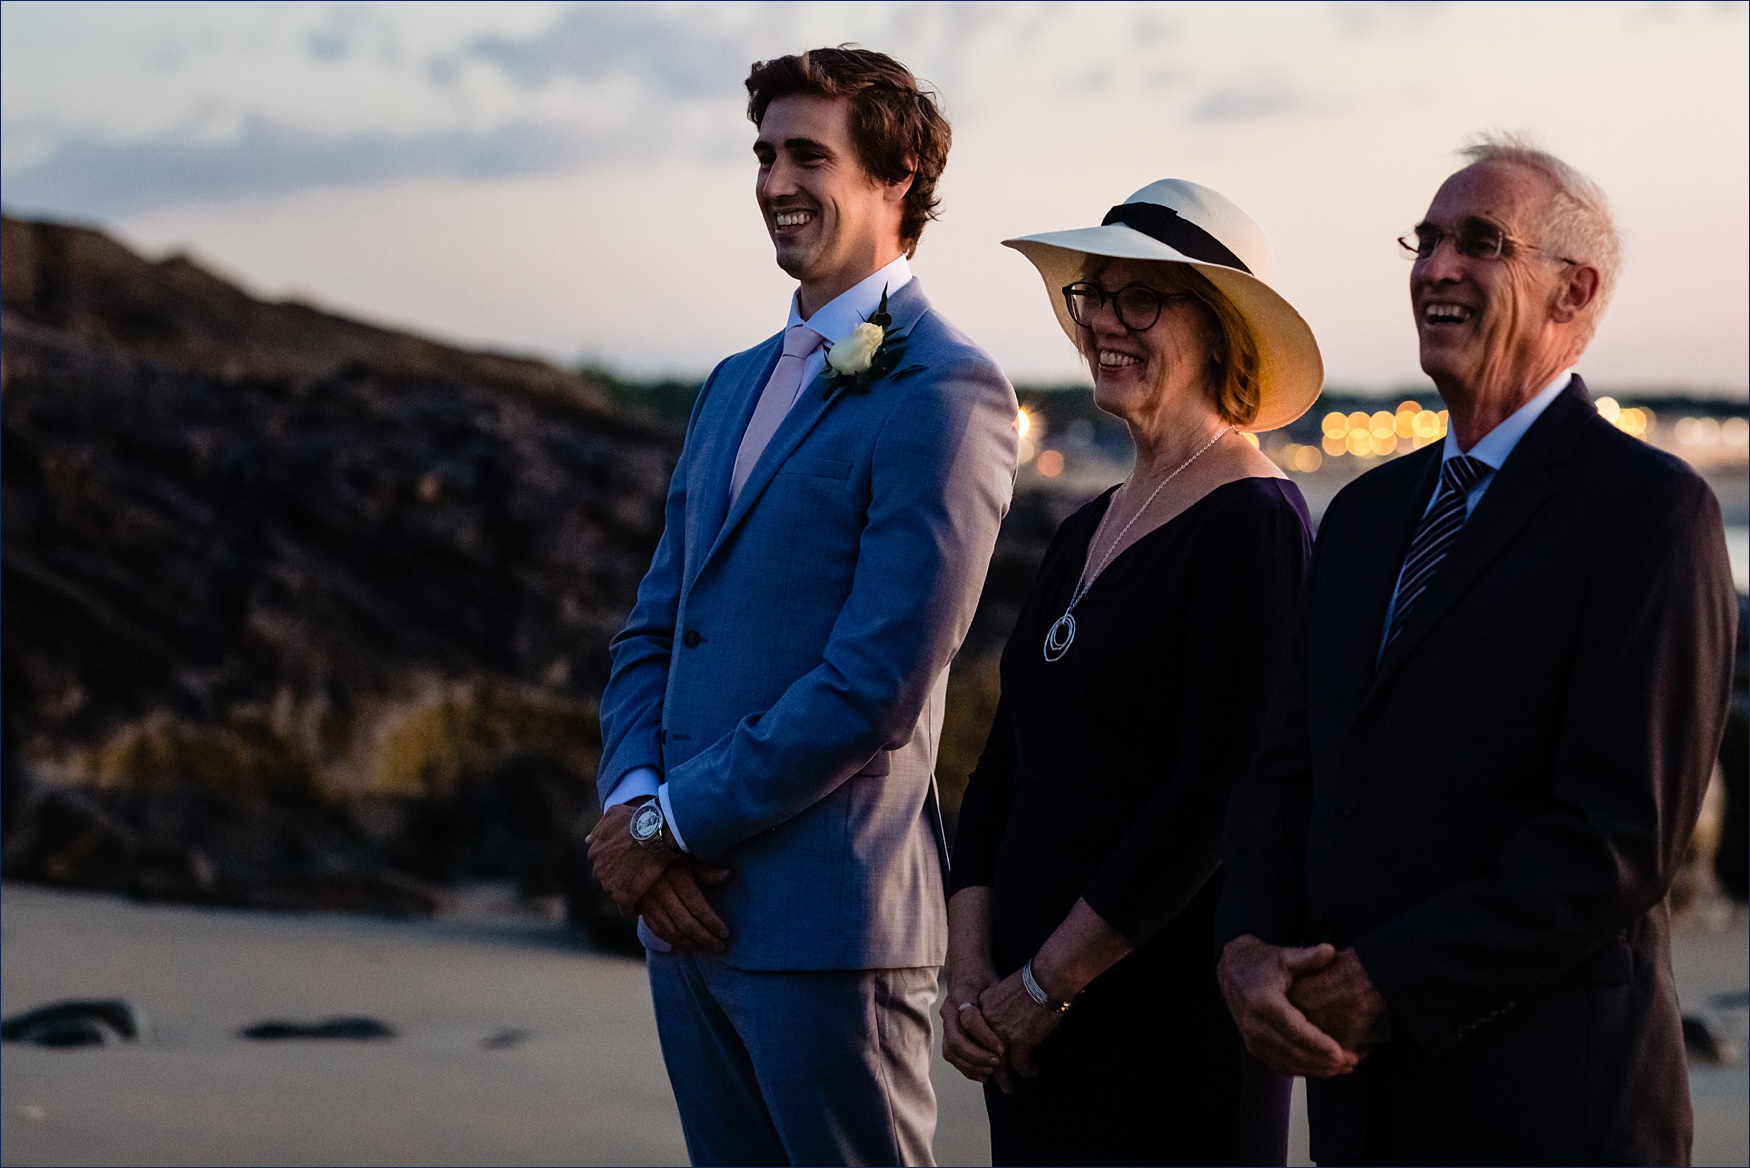 The groom watches as the bride makes her way to the ceremony at sunrise on the Ogunquit Maine beach